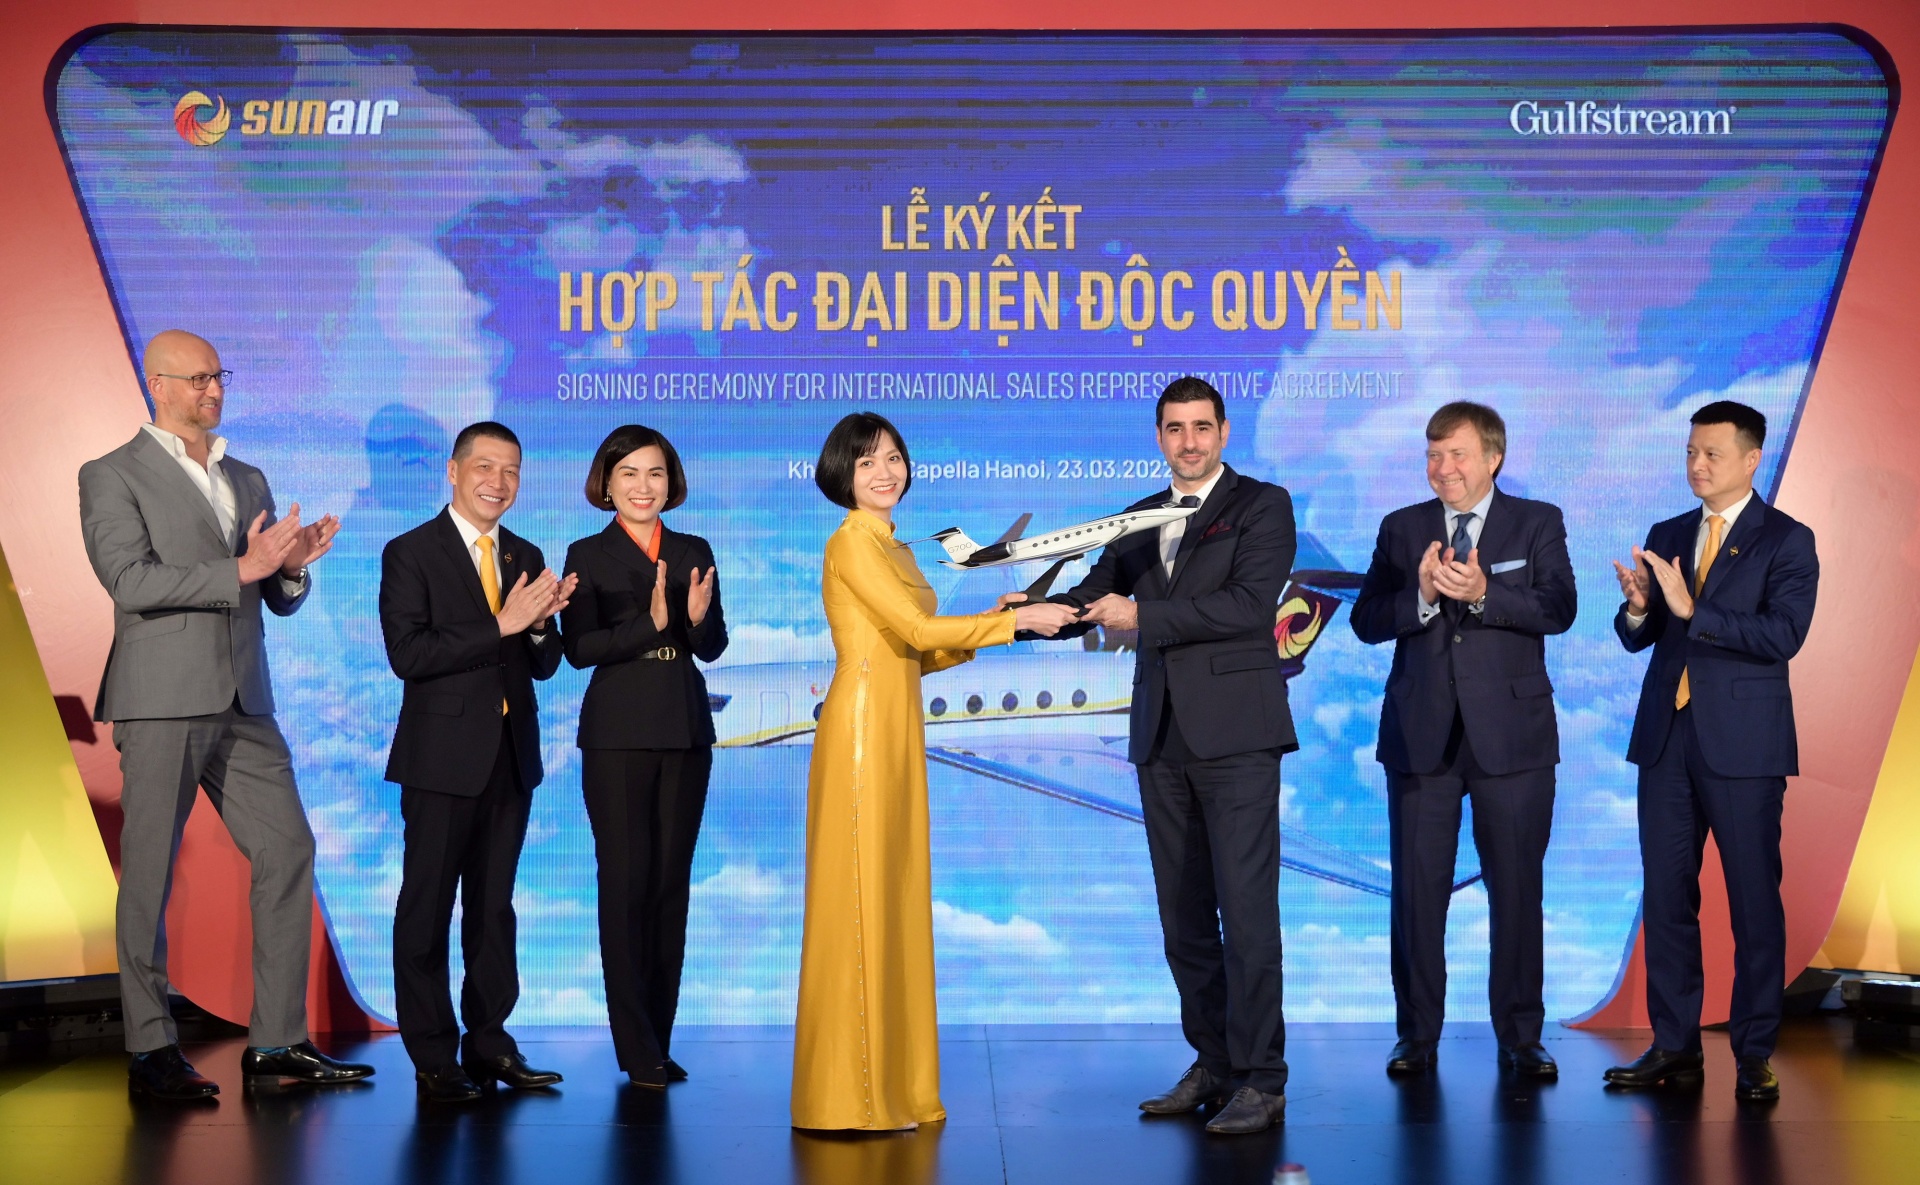 Sun Air shakes hands with Gulfstream to bring luxury aircraft to Vietnamese elite